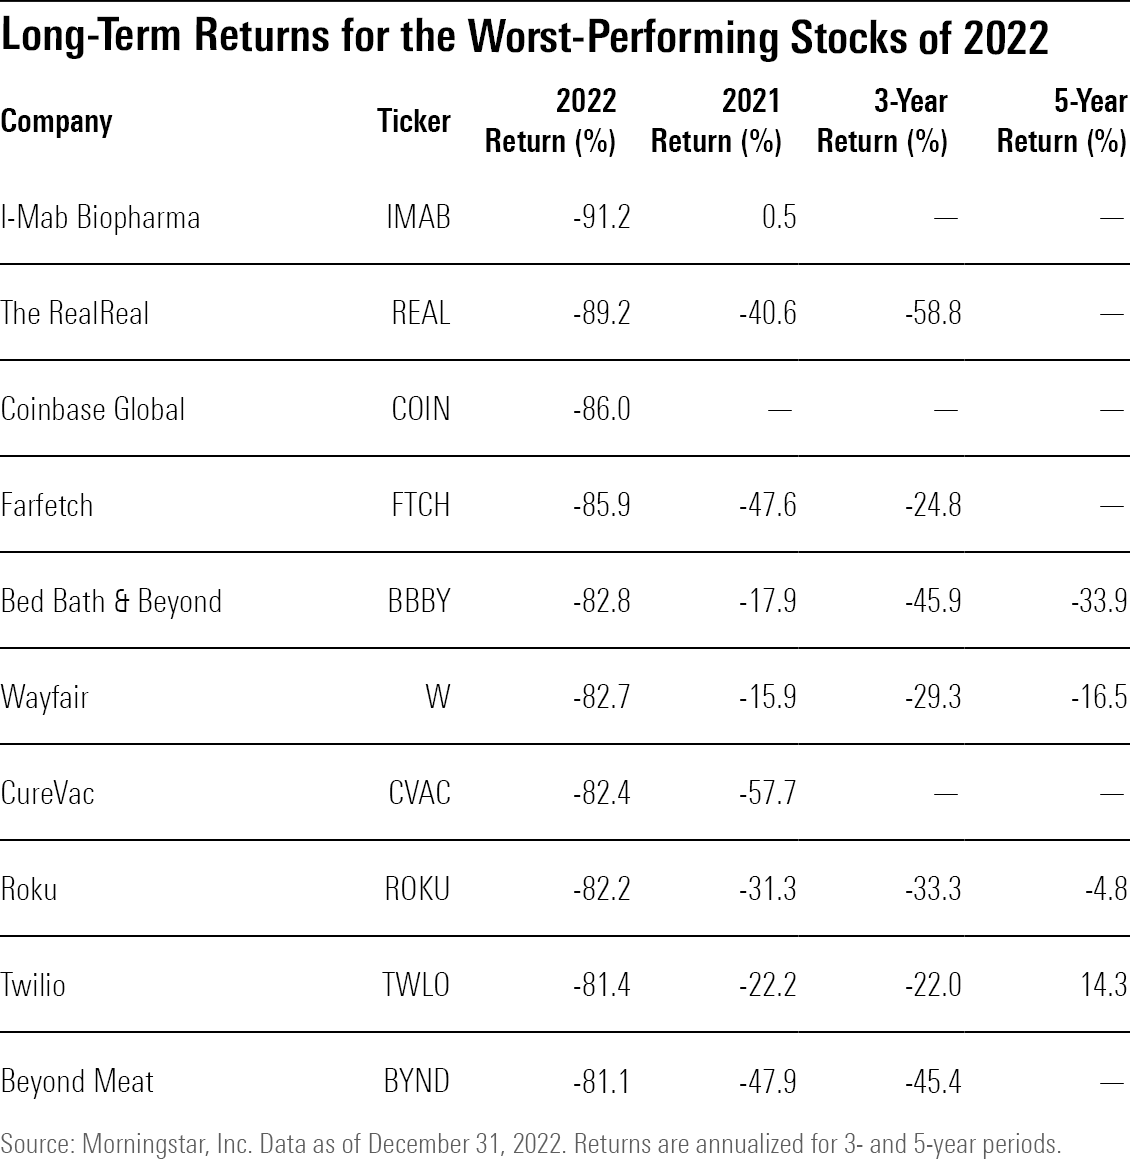 A table showing long-term returns of the worst-performing U.S.-listed stocks among those covered by Morningstar analysts.